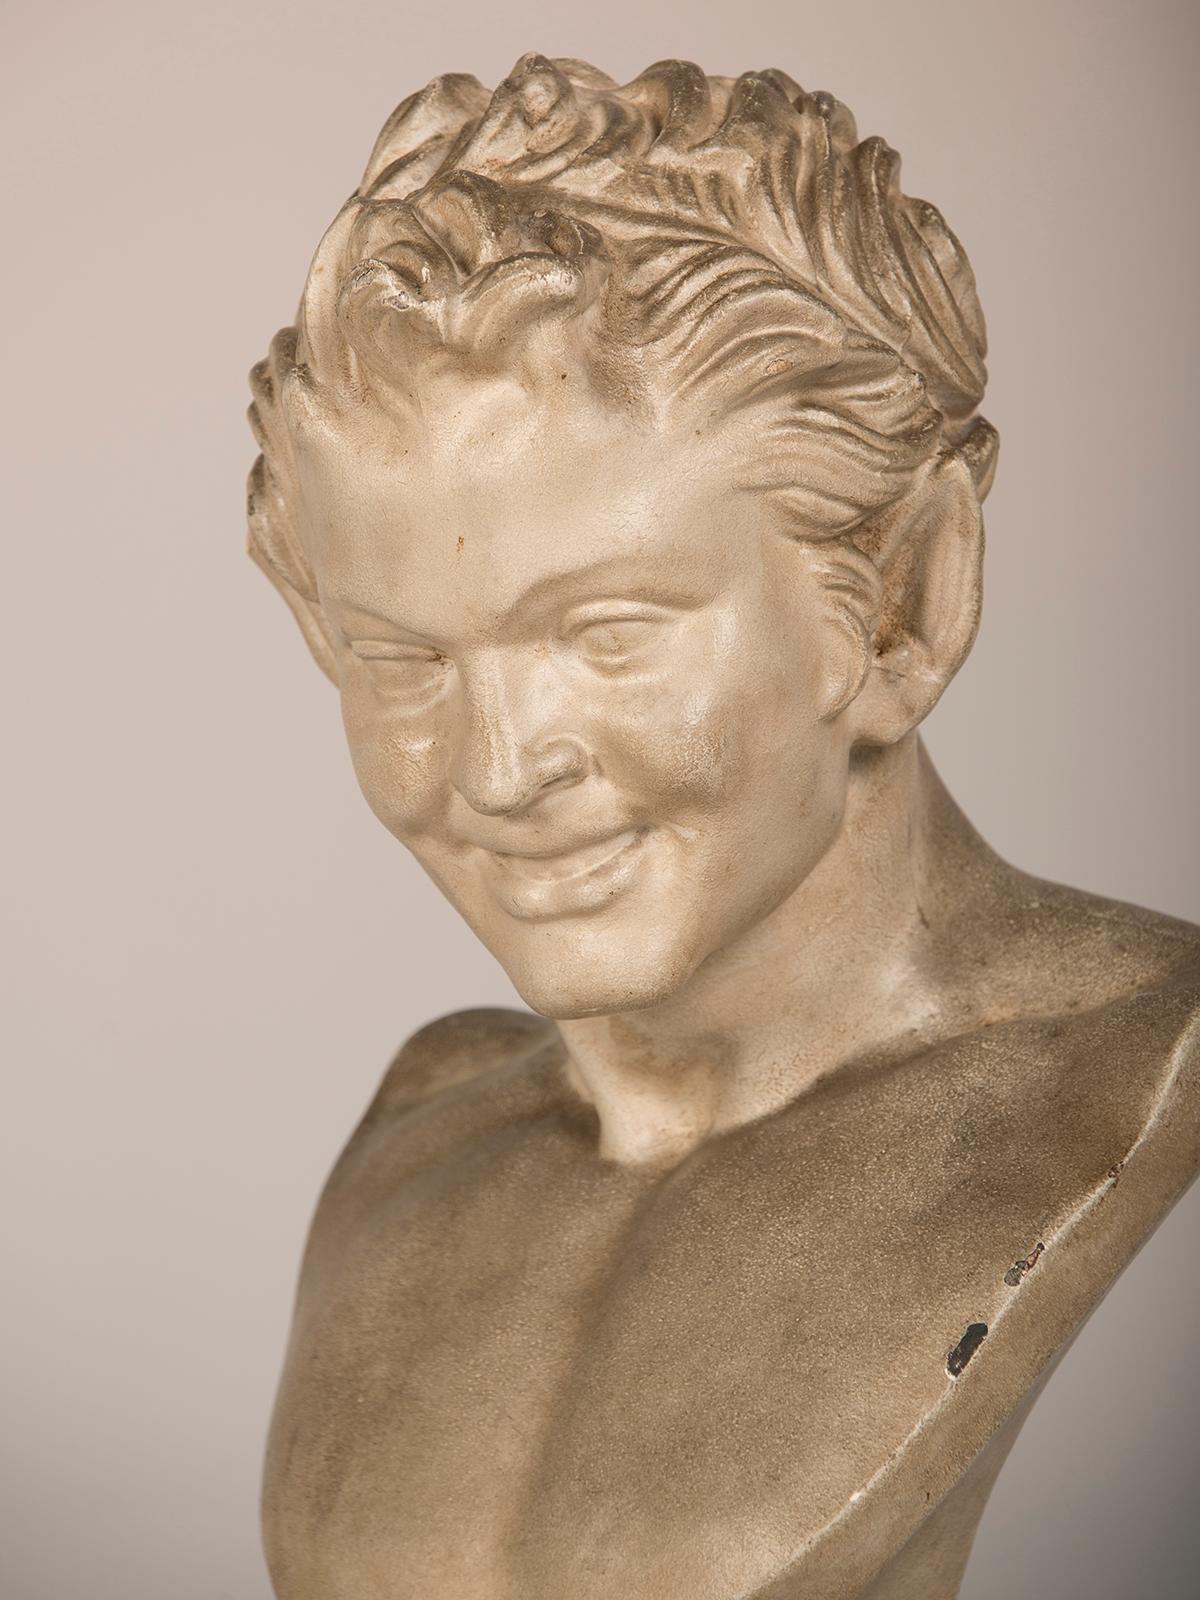 An antique German plaster bust of a character from 